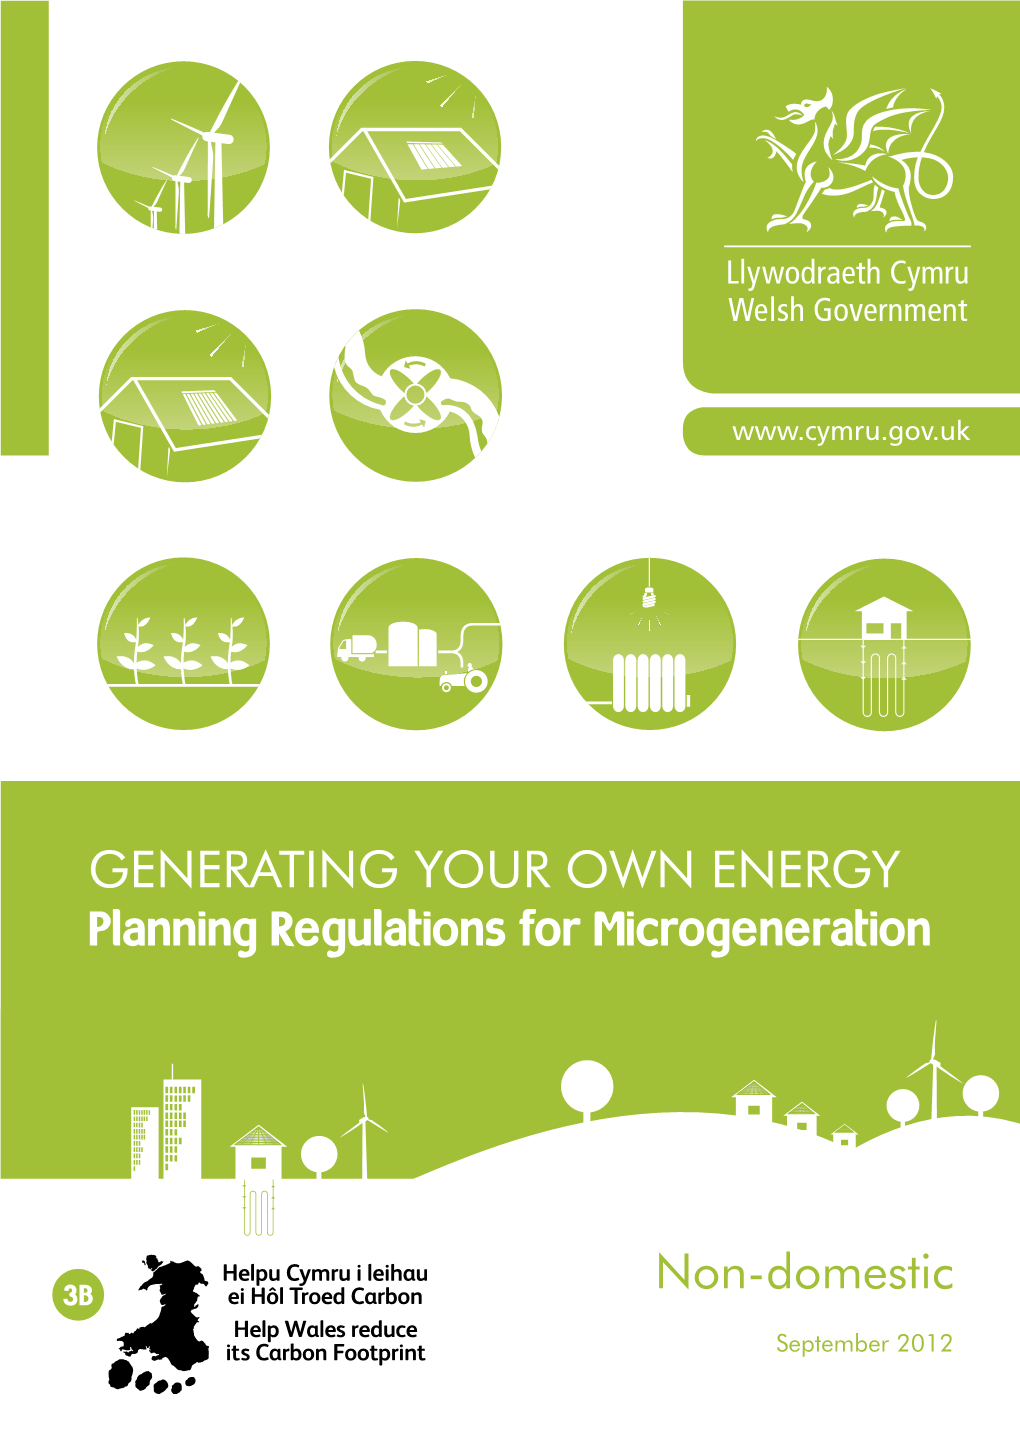 GENERATING YOUR OWN ENERGY Planning Regulations for Microgeneration